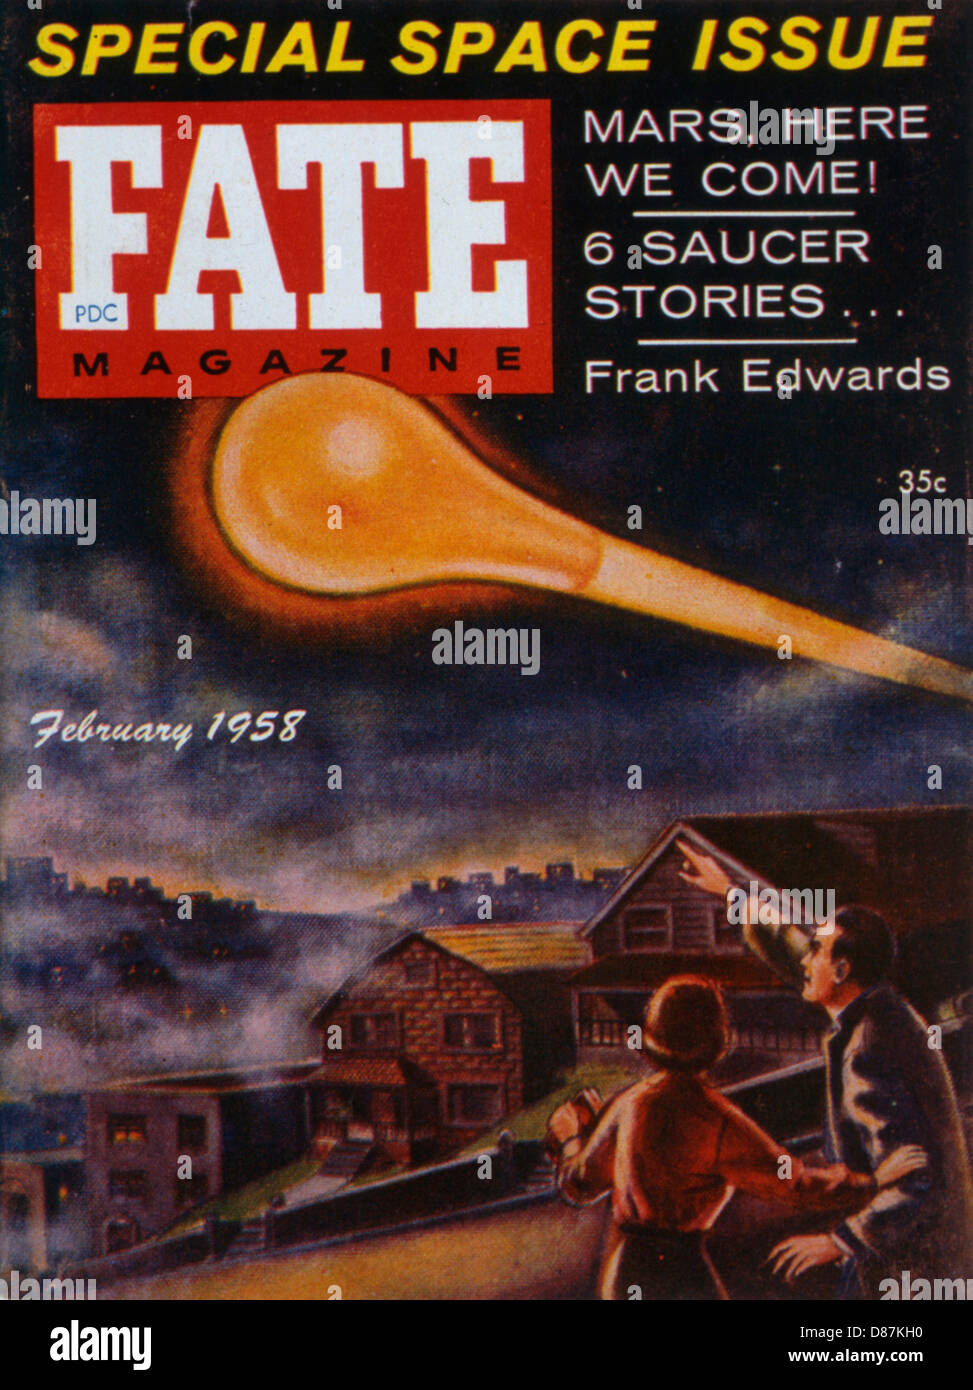 UFOS/FATE COVER 1958 Stock Photo